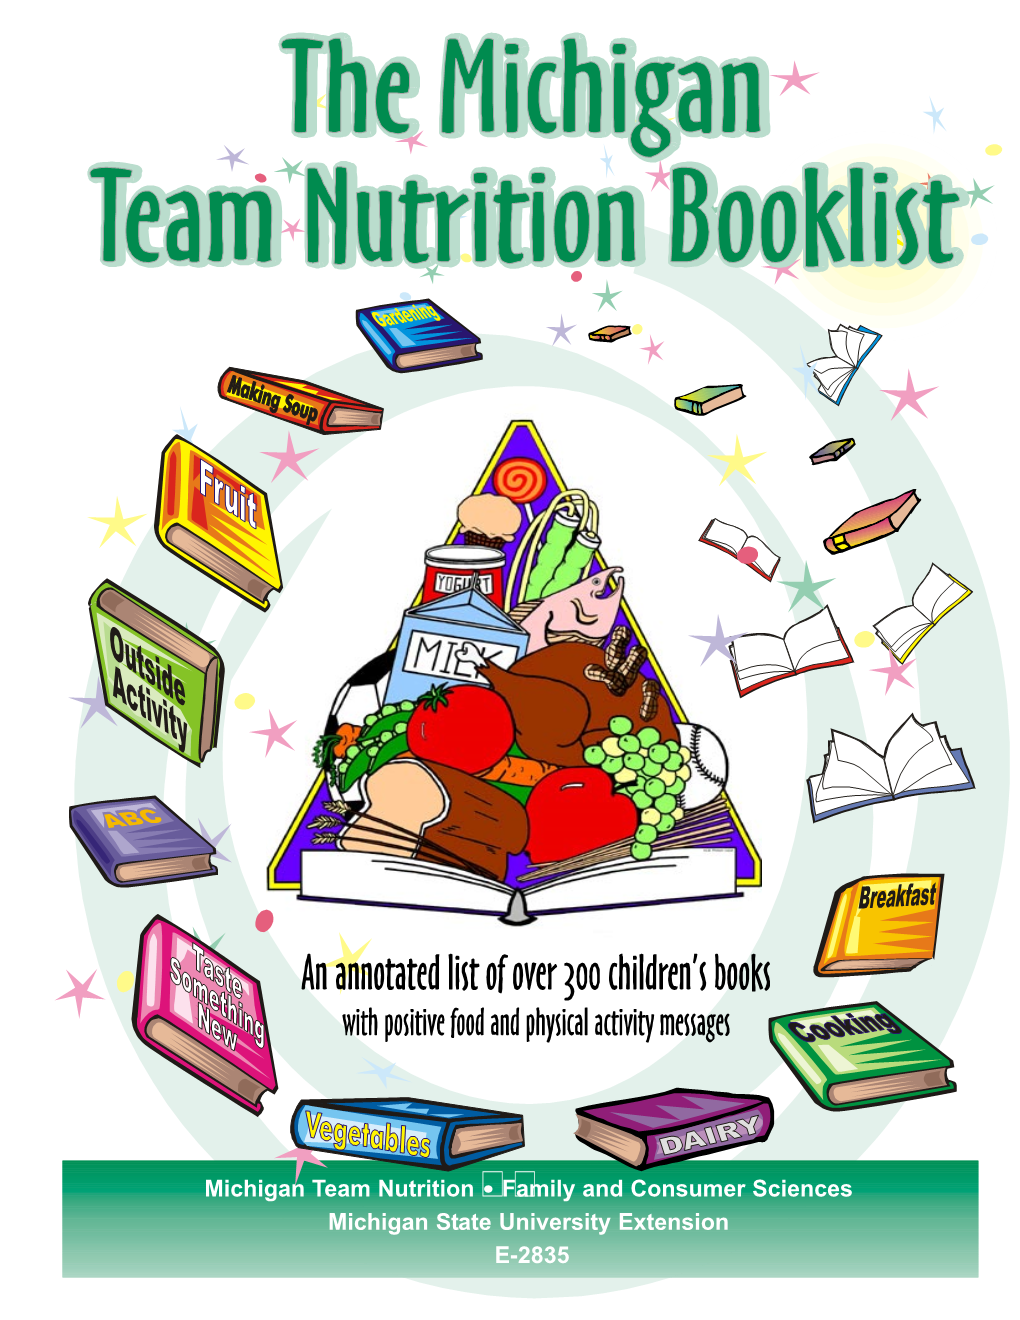 Michigan Team Nutrition Booklist About This Resource